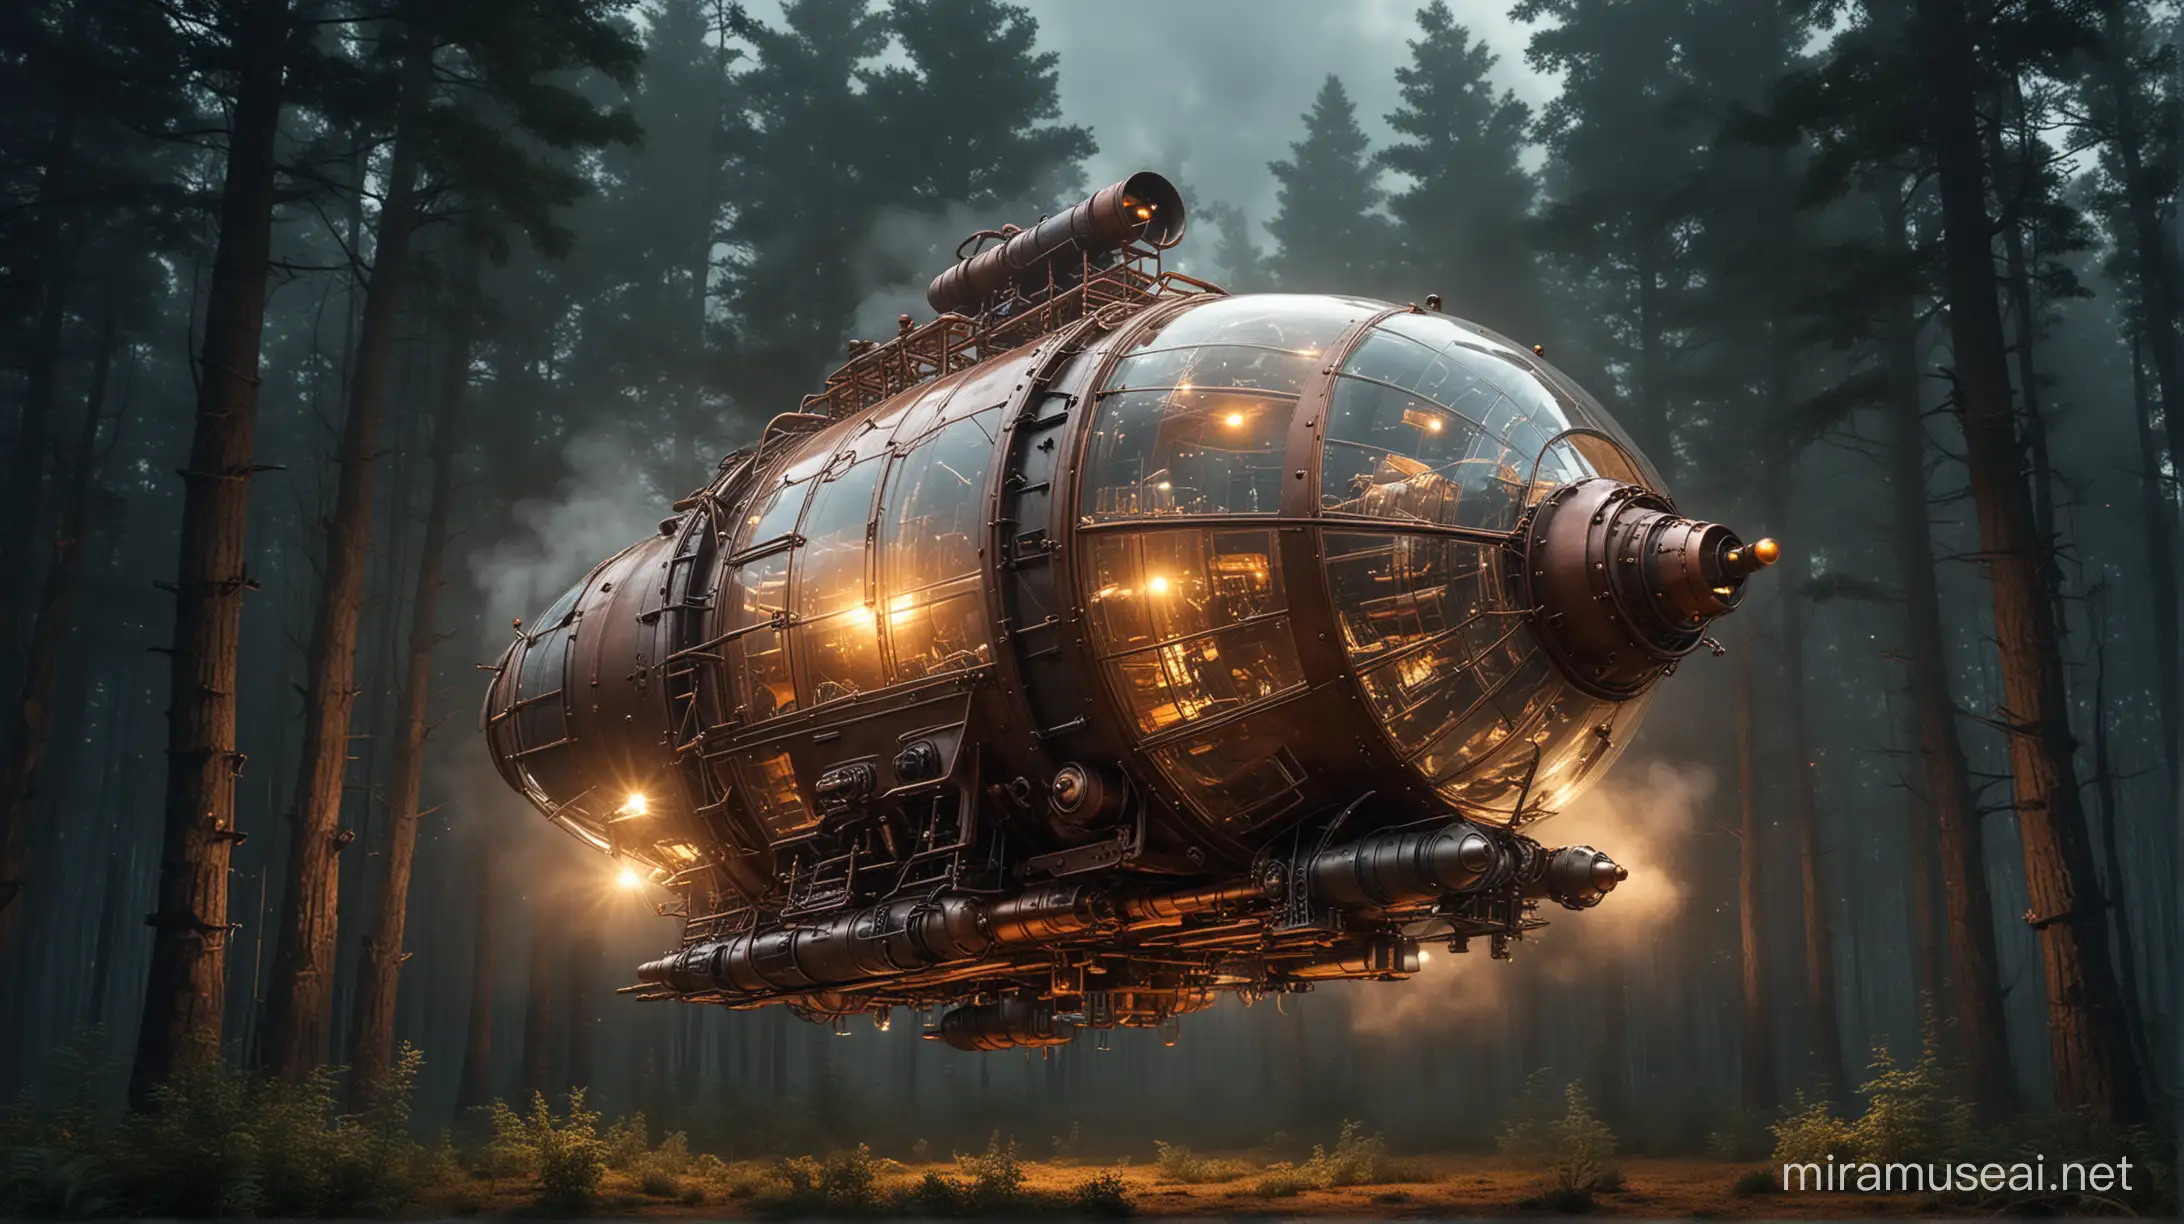 Giant Glass and Copper Steampunk Capsule Flying over Forest at Night with Illuminated Steam Engine and Position Lights